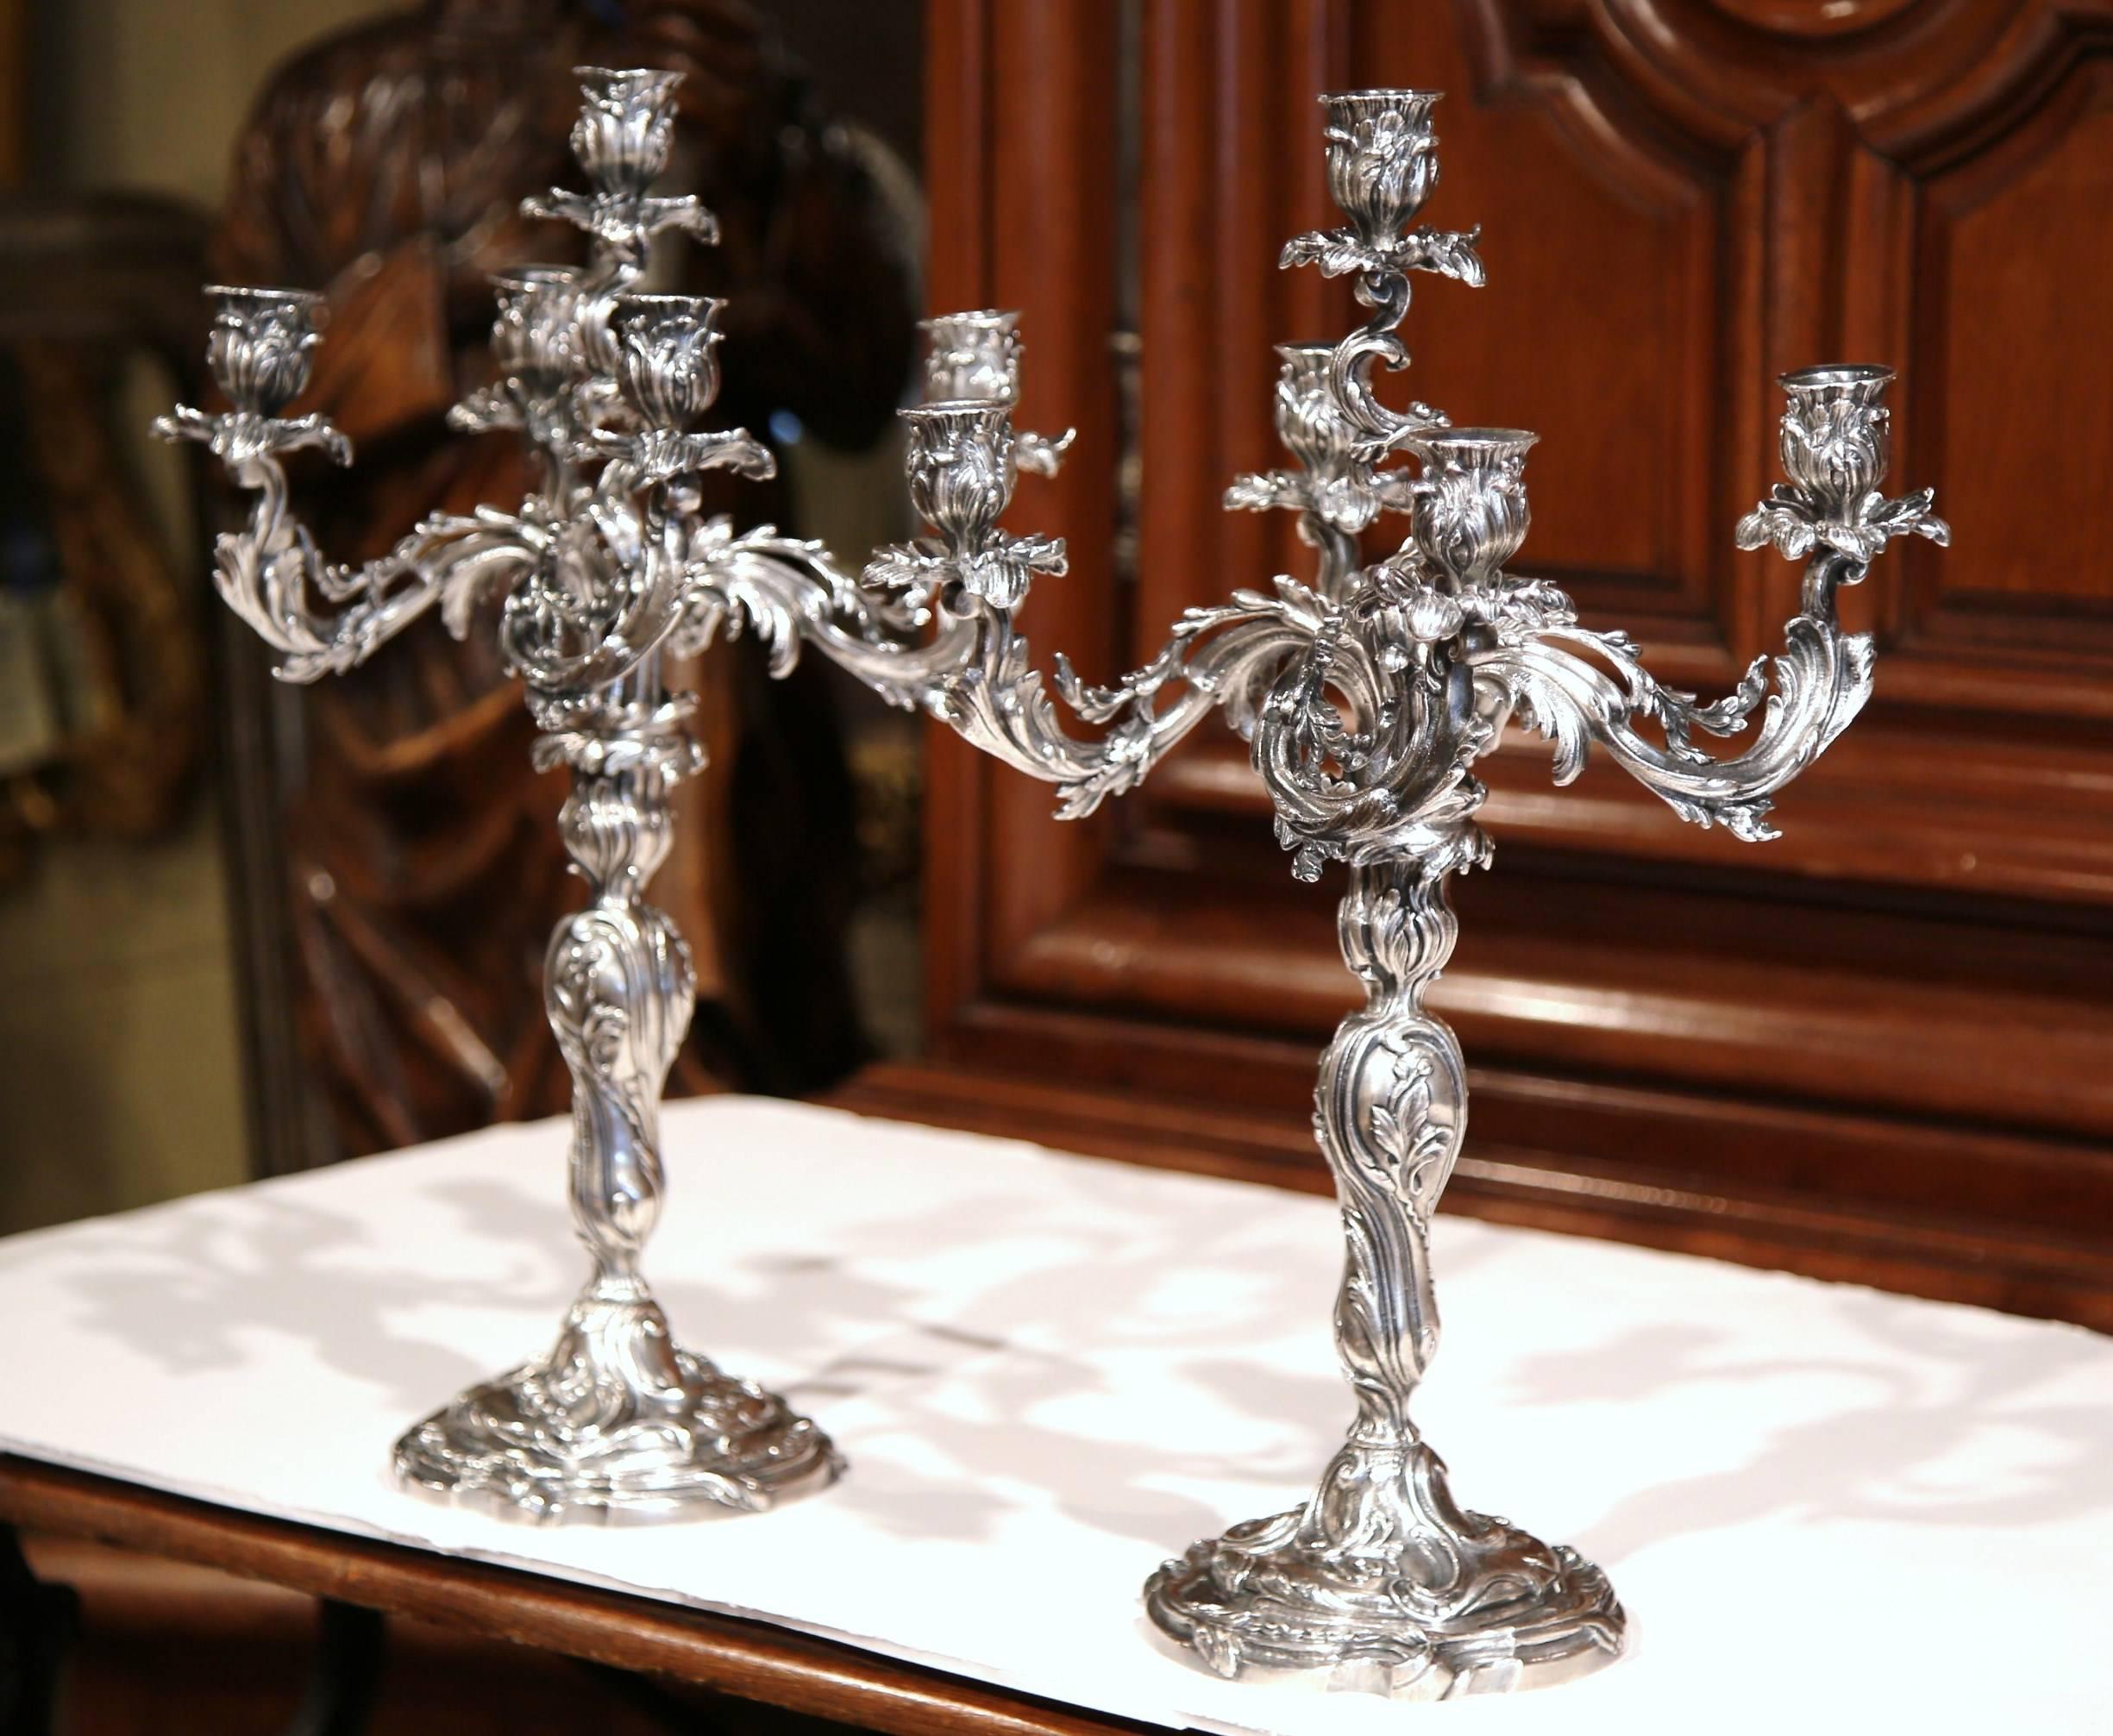 Decorate a dining table or console with this elegant pair of antique bronze candleholders from Paris, France. Crafted circa 1860, each candelabra features five beautiful, scrolled arms with leaves that have been silvered. The ornate candlesticks are